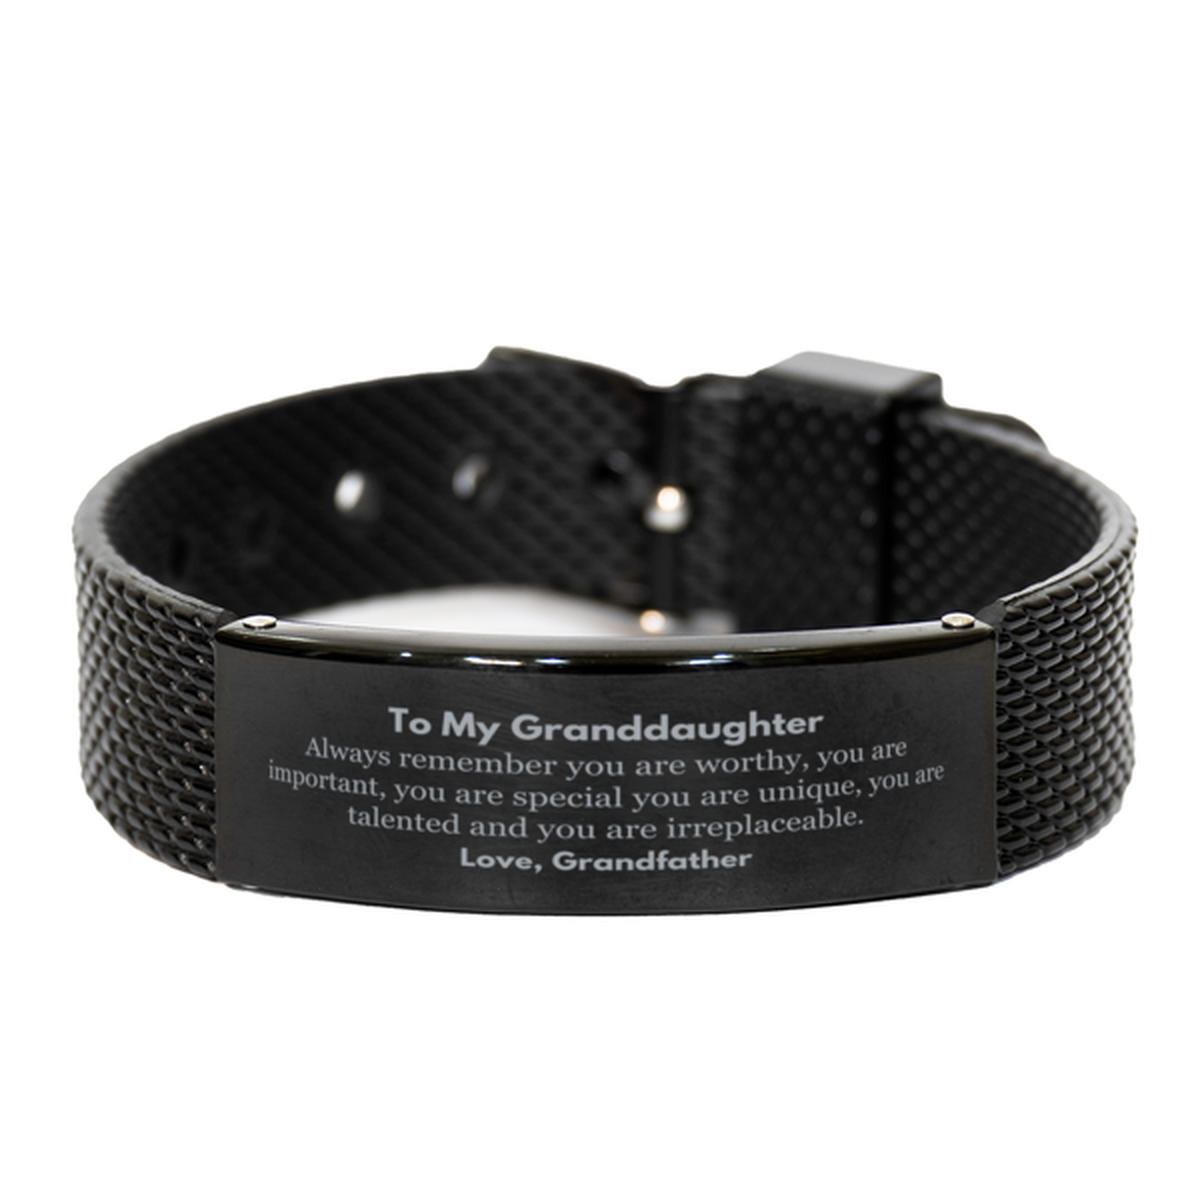 Granddaughter Birthday Gifts from Grandfather, Inspirational Black Shark Mesh Bracelet for Granddaughter Christmas Graduation Gifts for Granddaughter Always remember you are worthy, you are important. Love, Grandfather